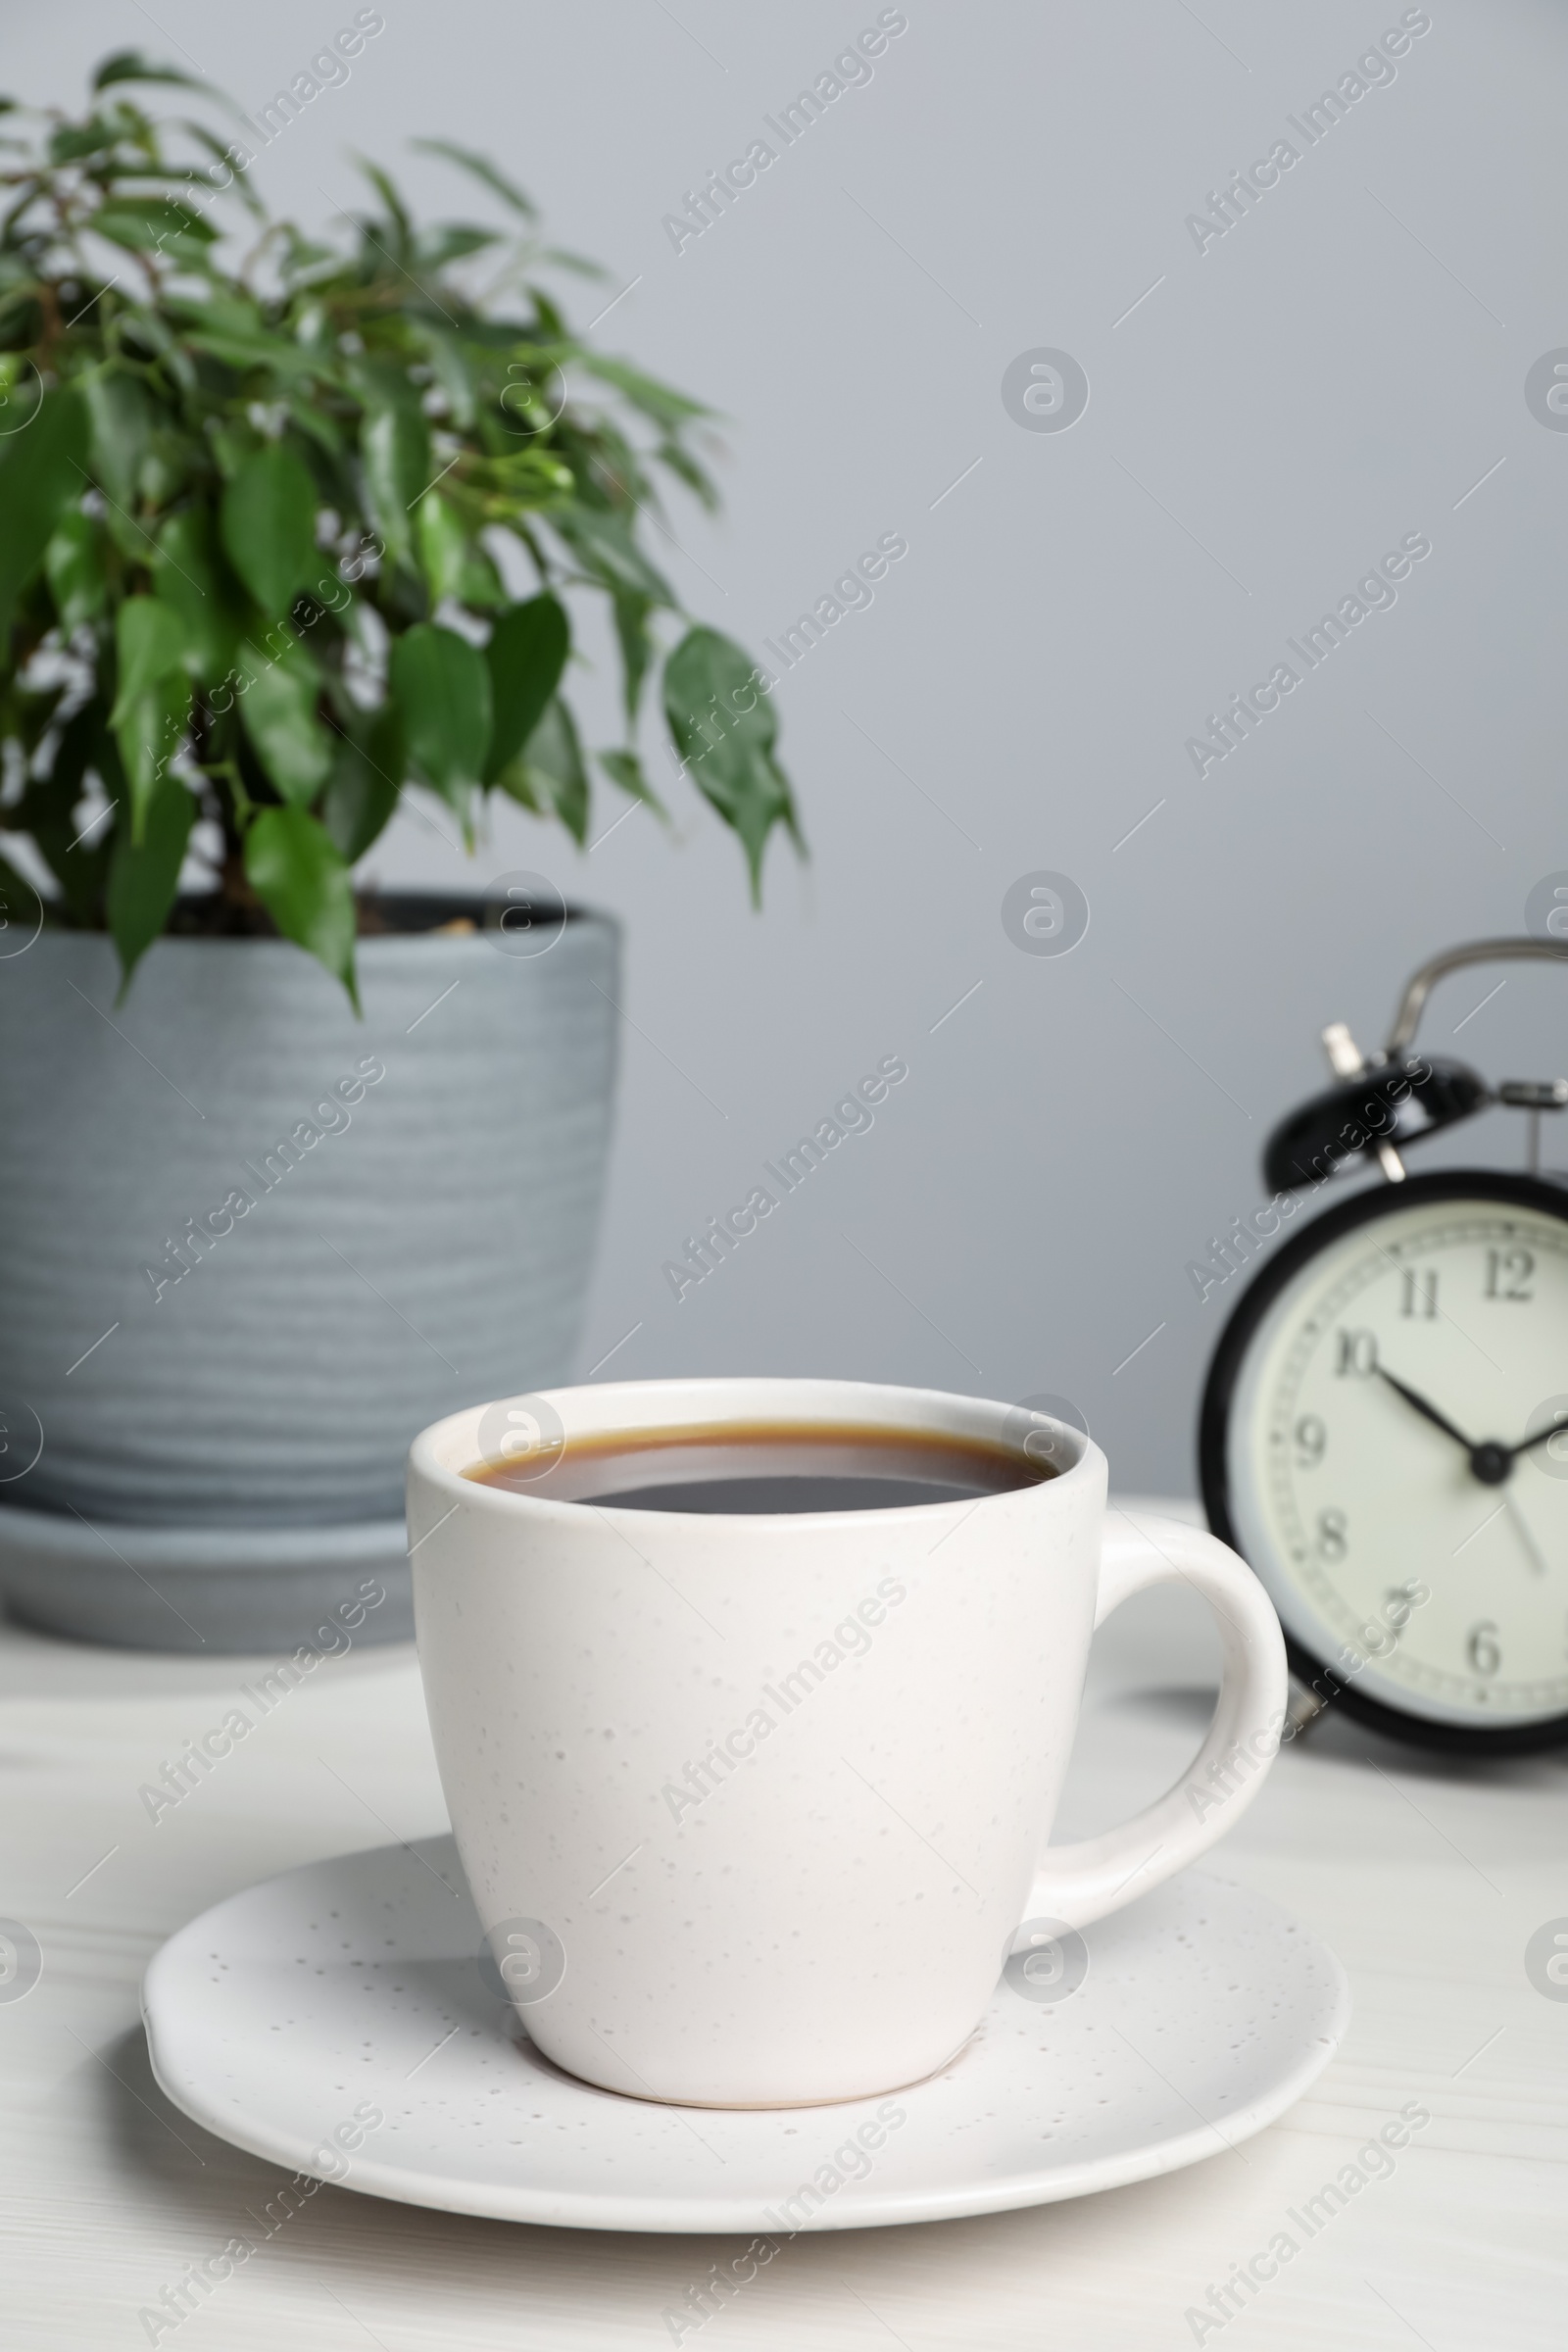 Photo of Cup of coffee, houseplant and alarm clock on white wooden table against grey wall